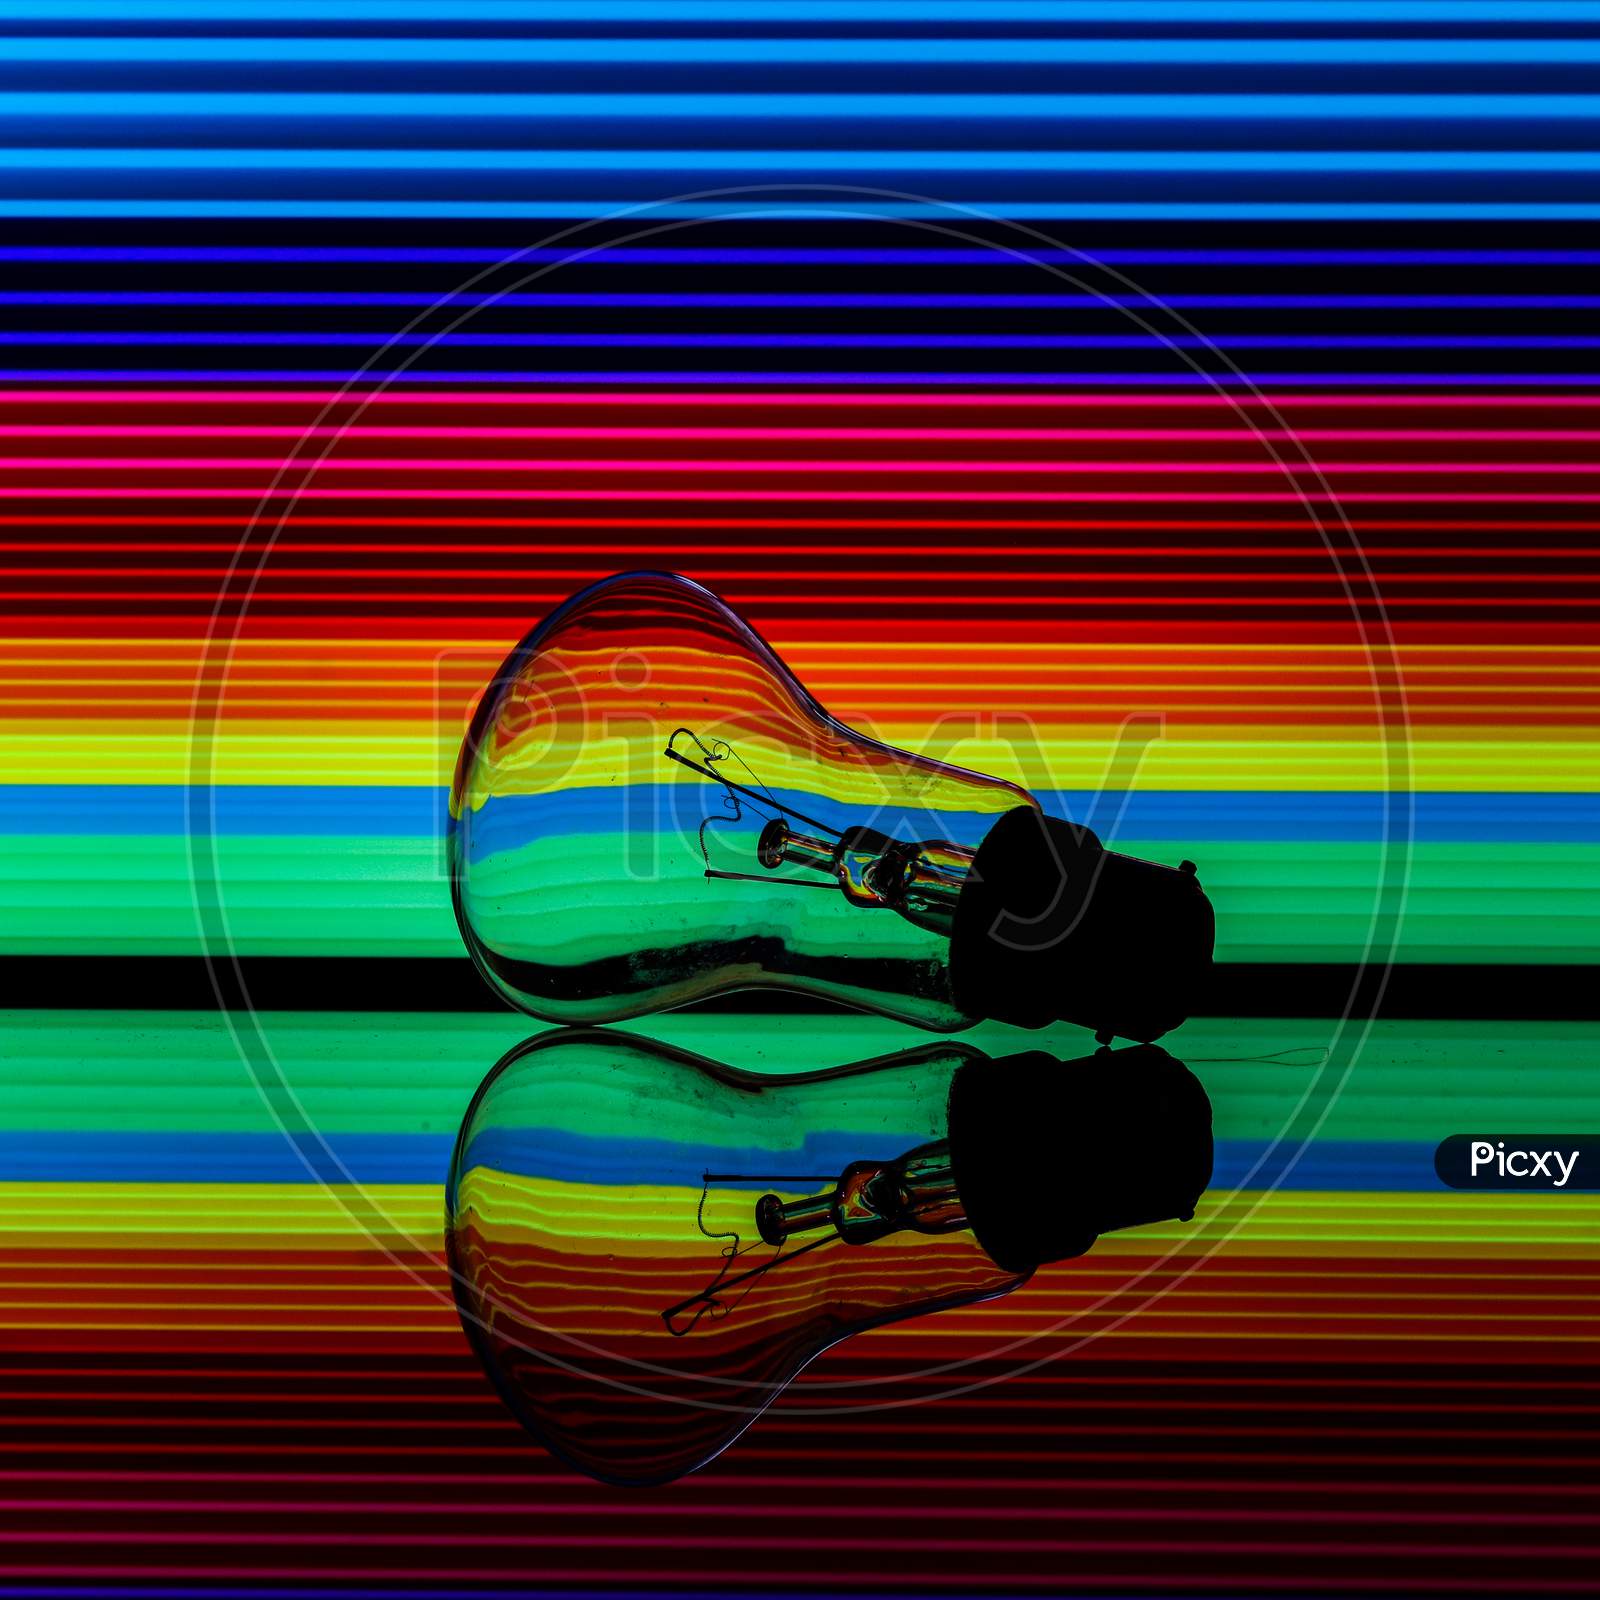 CREATIVE PHOTOGRAPHY WITH BULB AND COLORFUL LIGHT